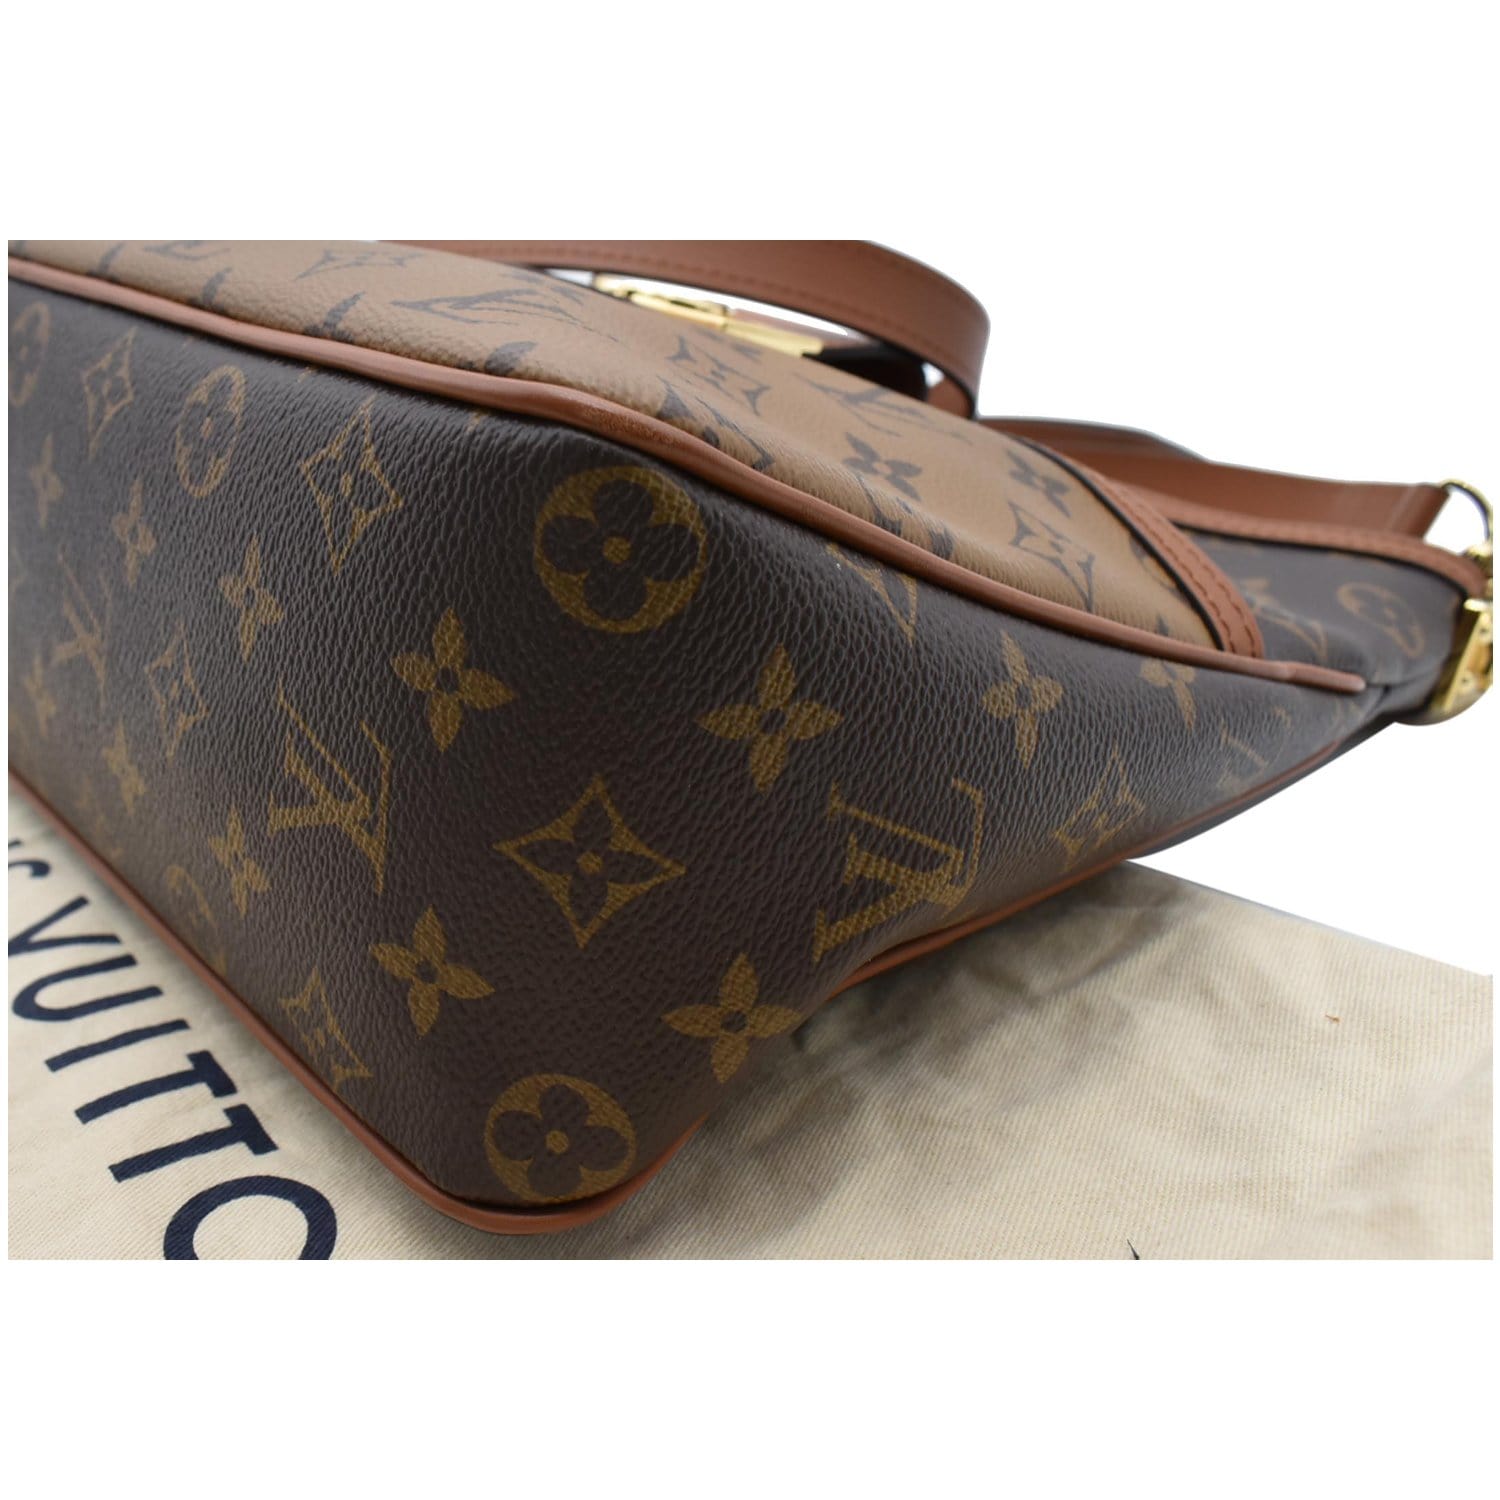 Pre-Owned Louis Vuitton Dauphine Bag 195056/33